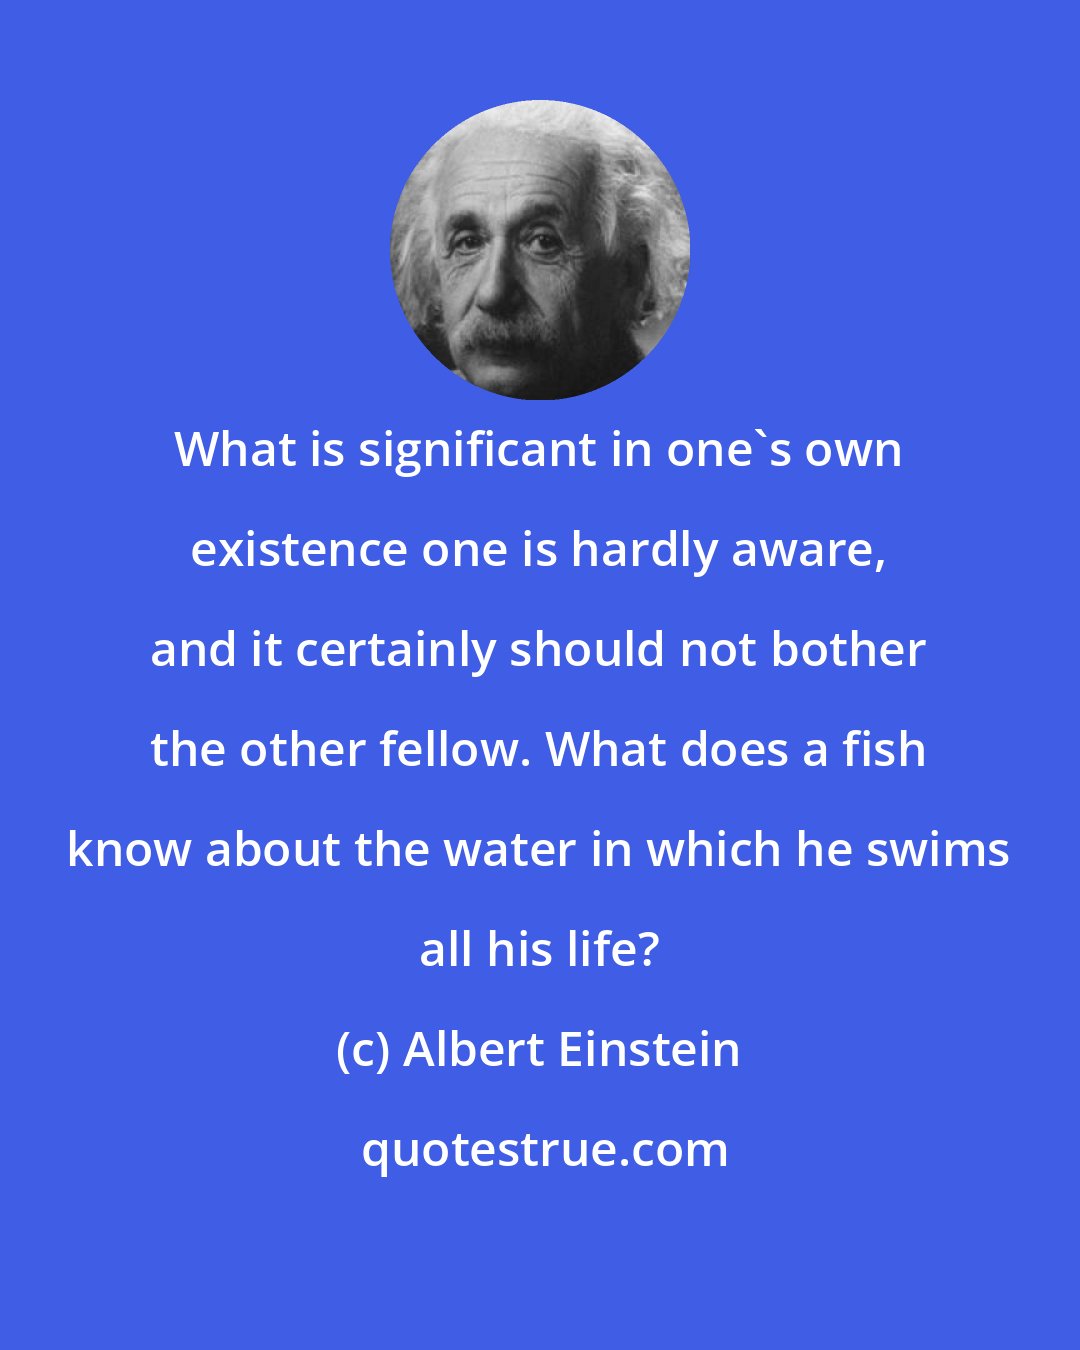 Albert Einstein: What is significant in one's own existence one is hardly aware, and it certainly should not bother the other fellow. What does a fish know about the water in which he swims all his life?